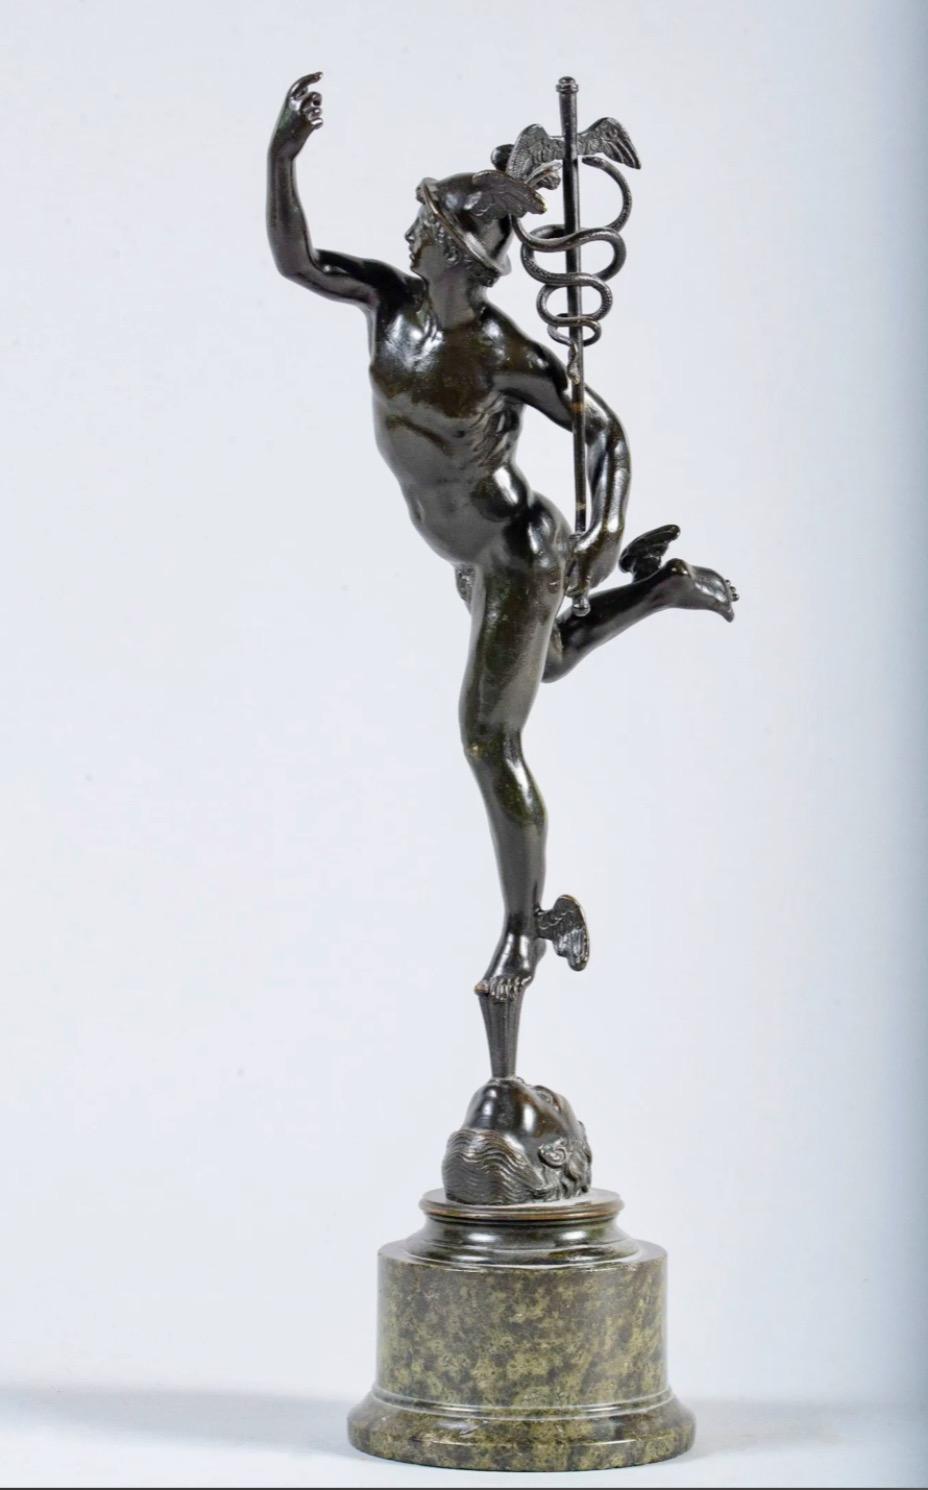 Carved 19th Century Italian Grand Tour Bronze Sculpture of Mercury after Giambologna